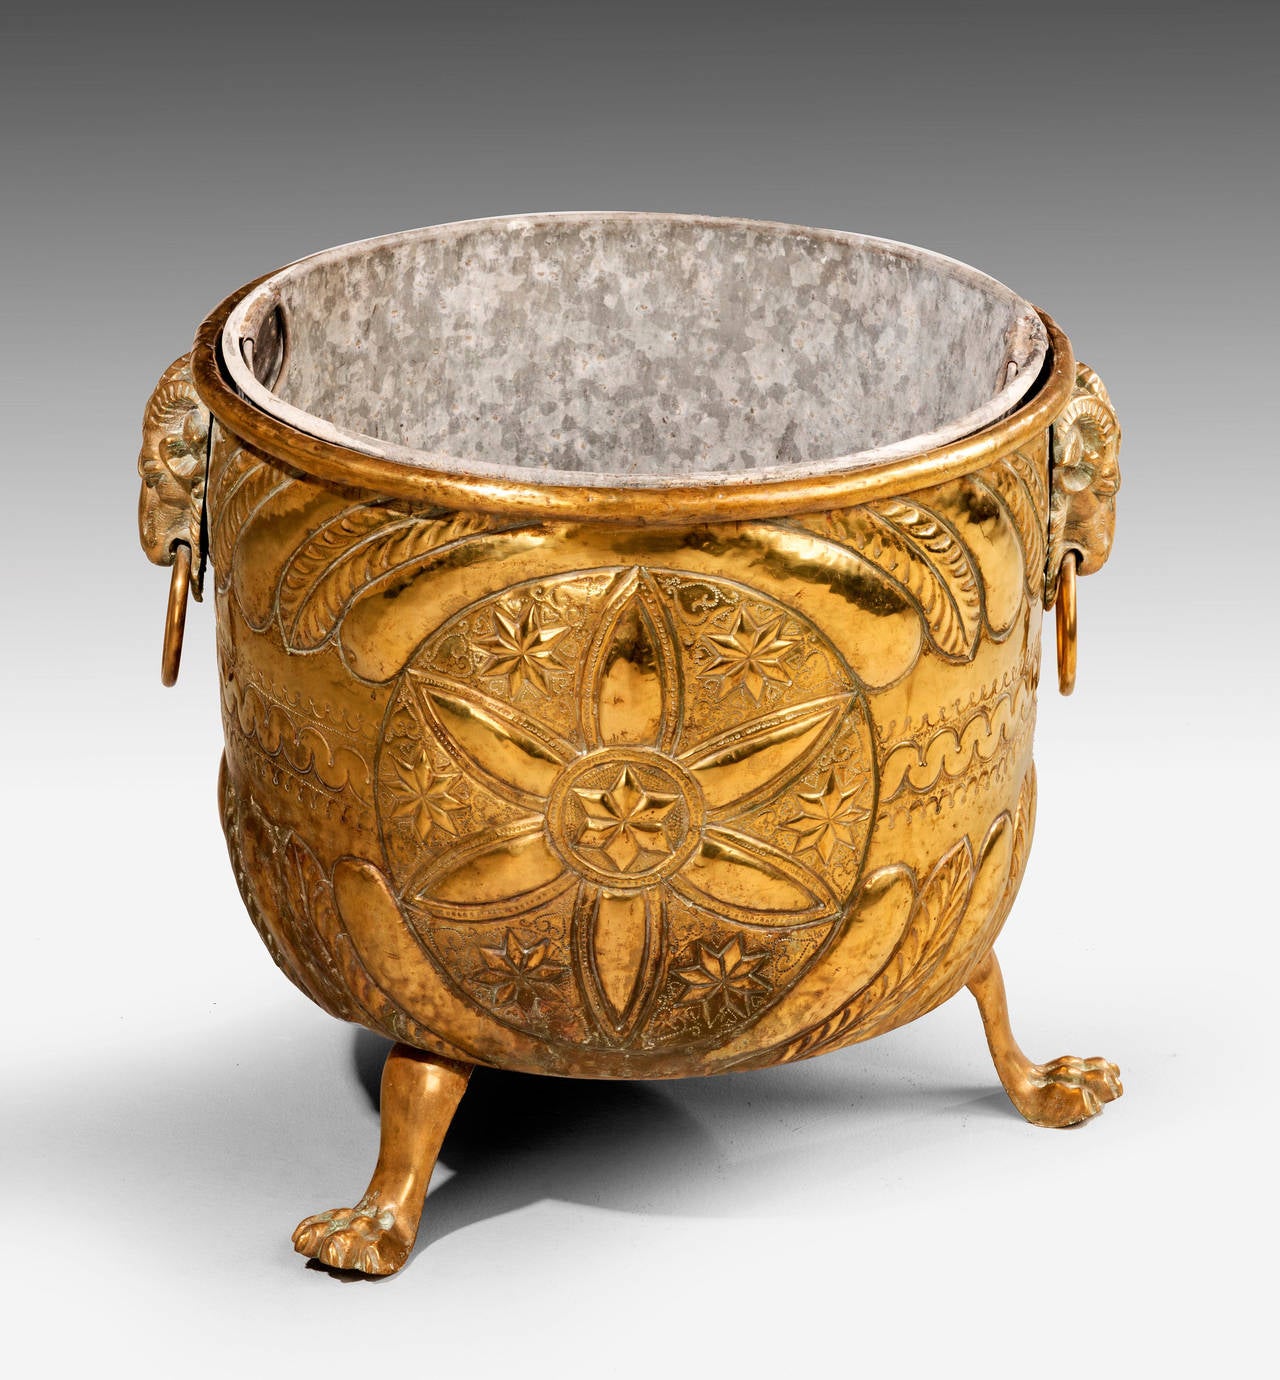 A very large and good Dutch brass container. With rams mount handles, on paw feet. The decoration strongly carried out with repousse work.